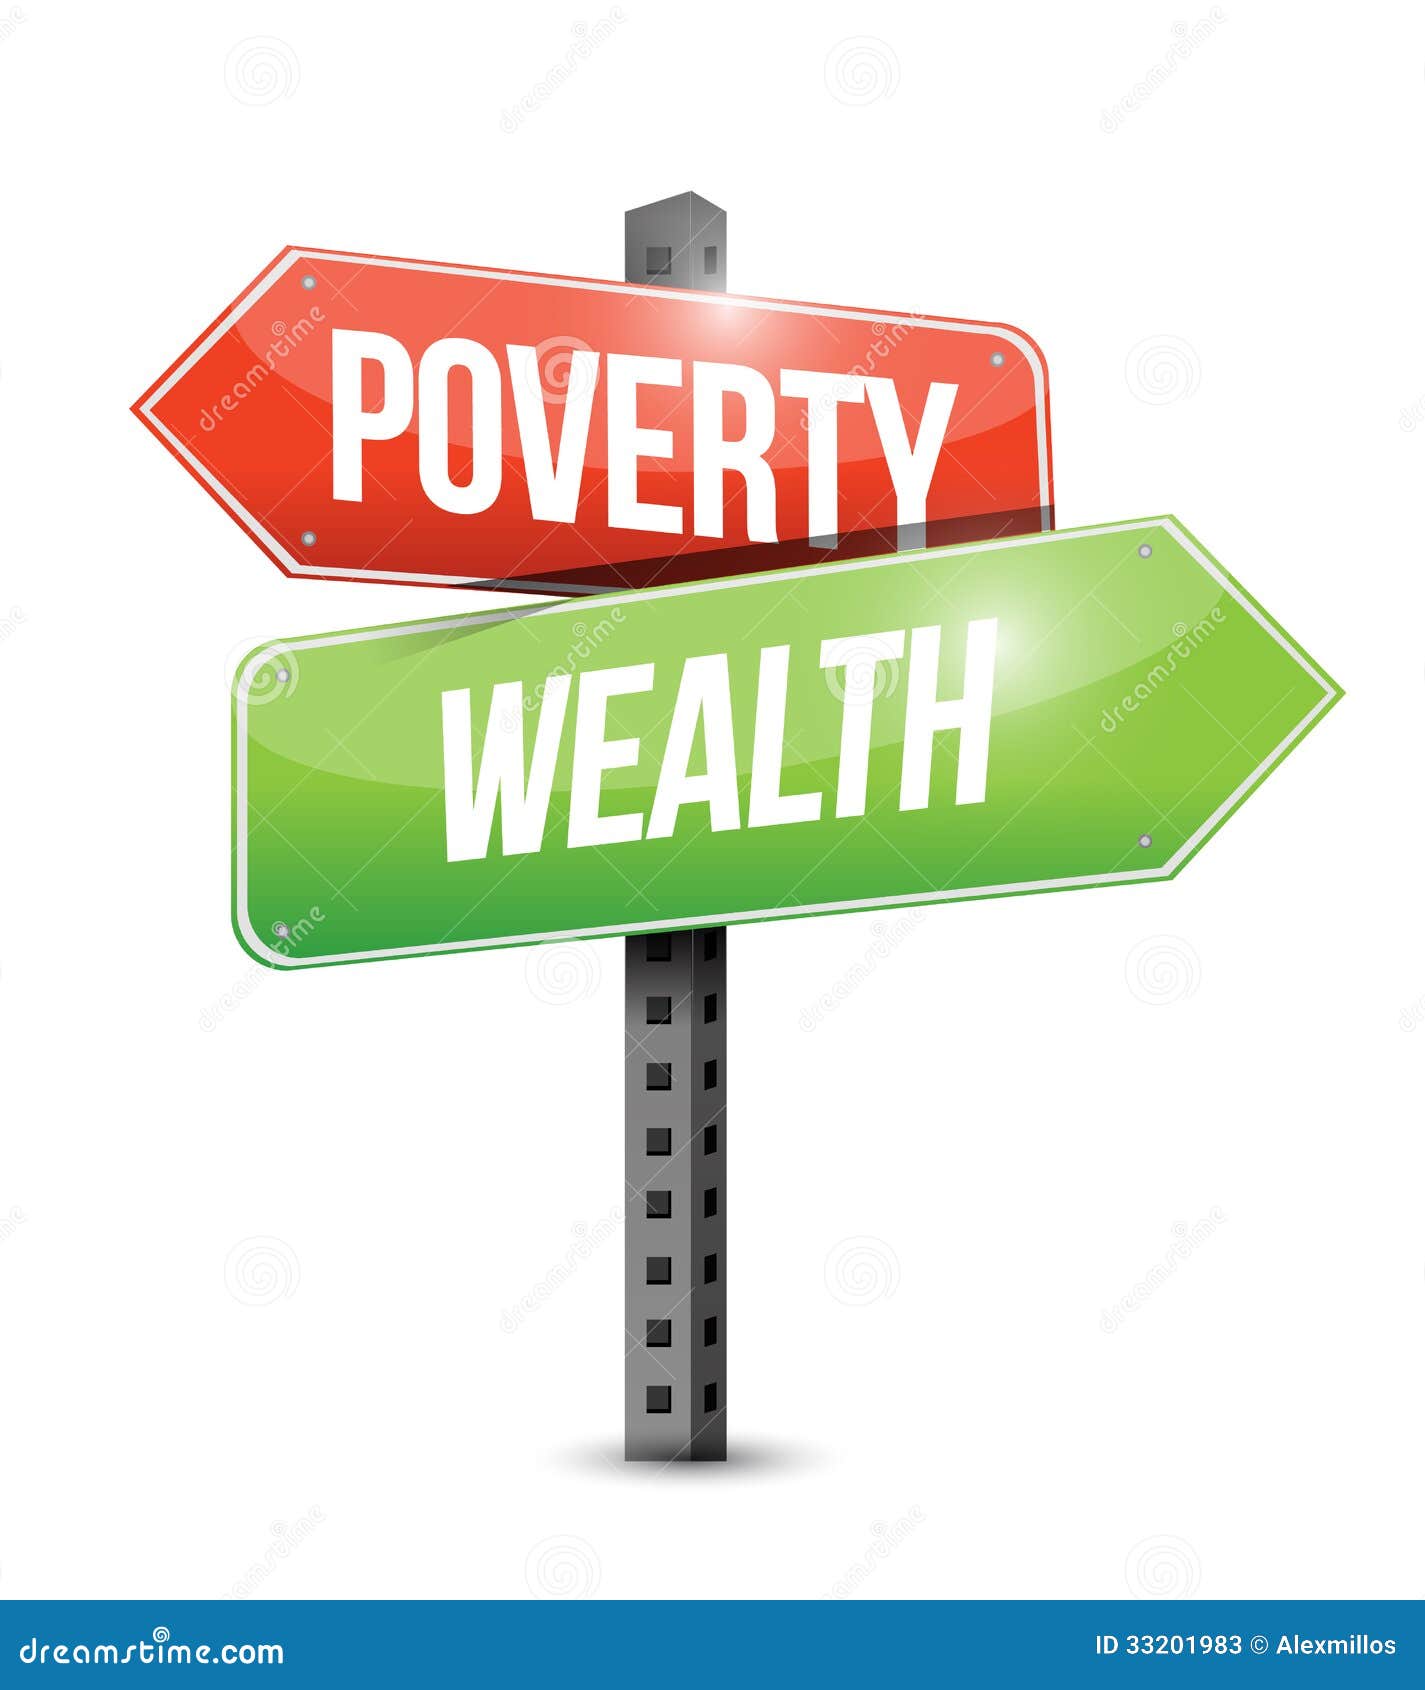 clipart on poverty - photo #9